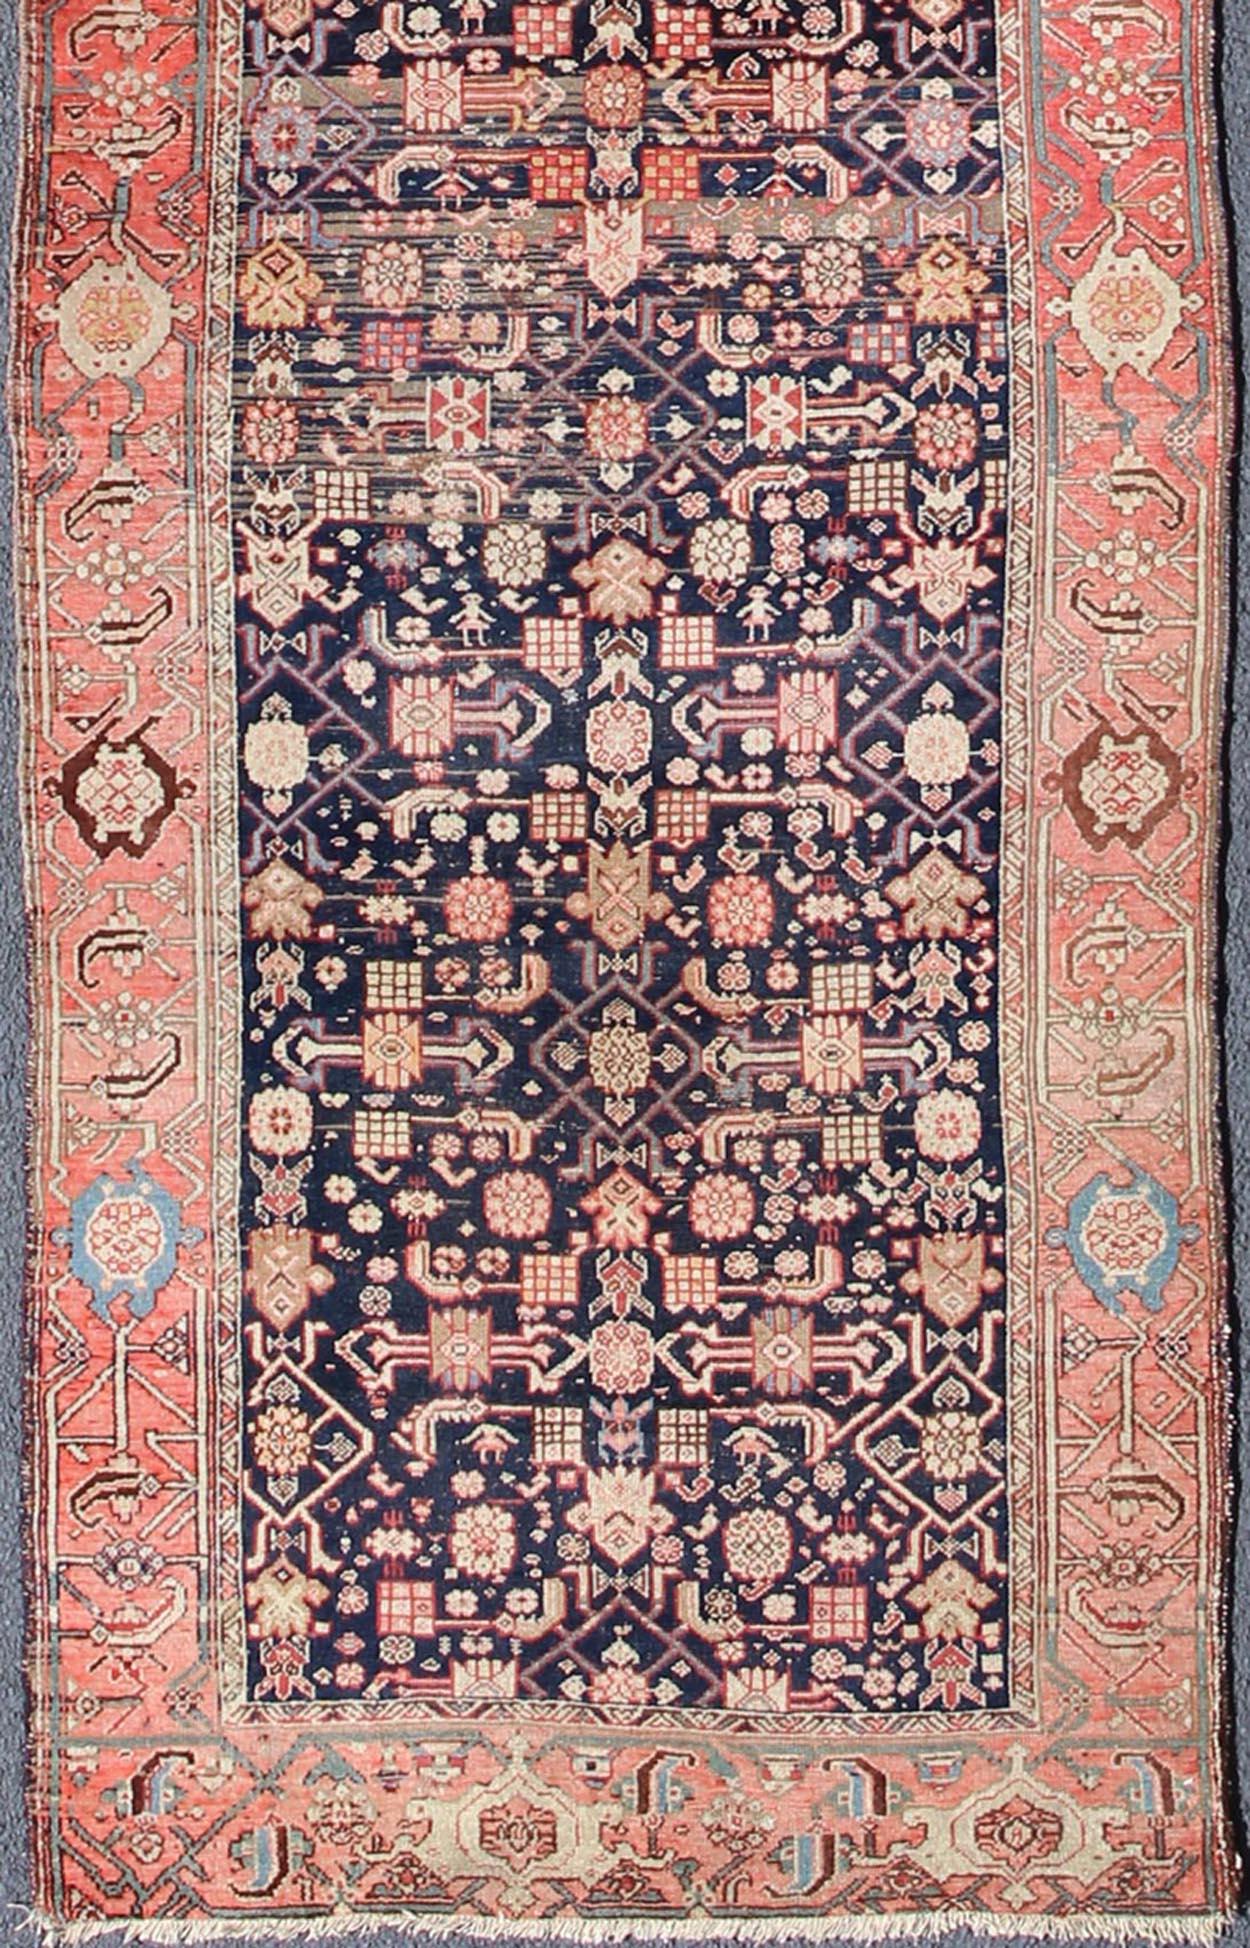 Variegated Border Malayer antique runner from Persia with geometric floral central field design, rug zir-14, country of origin / type: Iran / Malayer, circa 1900.

This antique Persian Malayer runner, circa early 20th century, relies heavily on